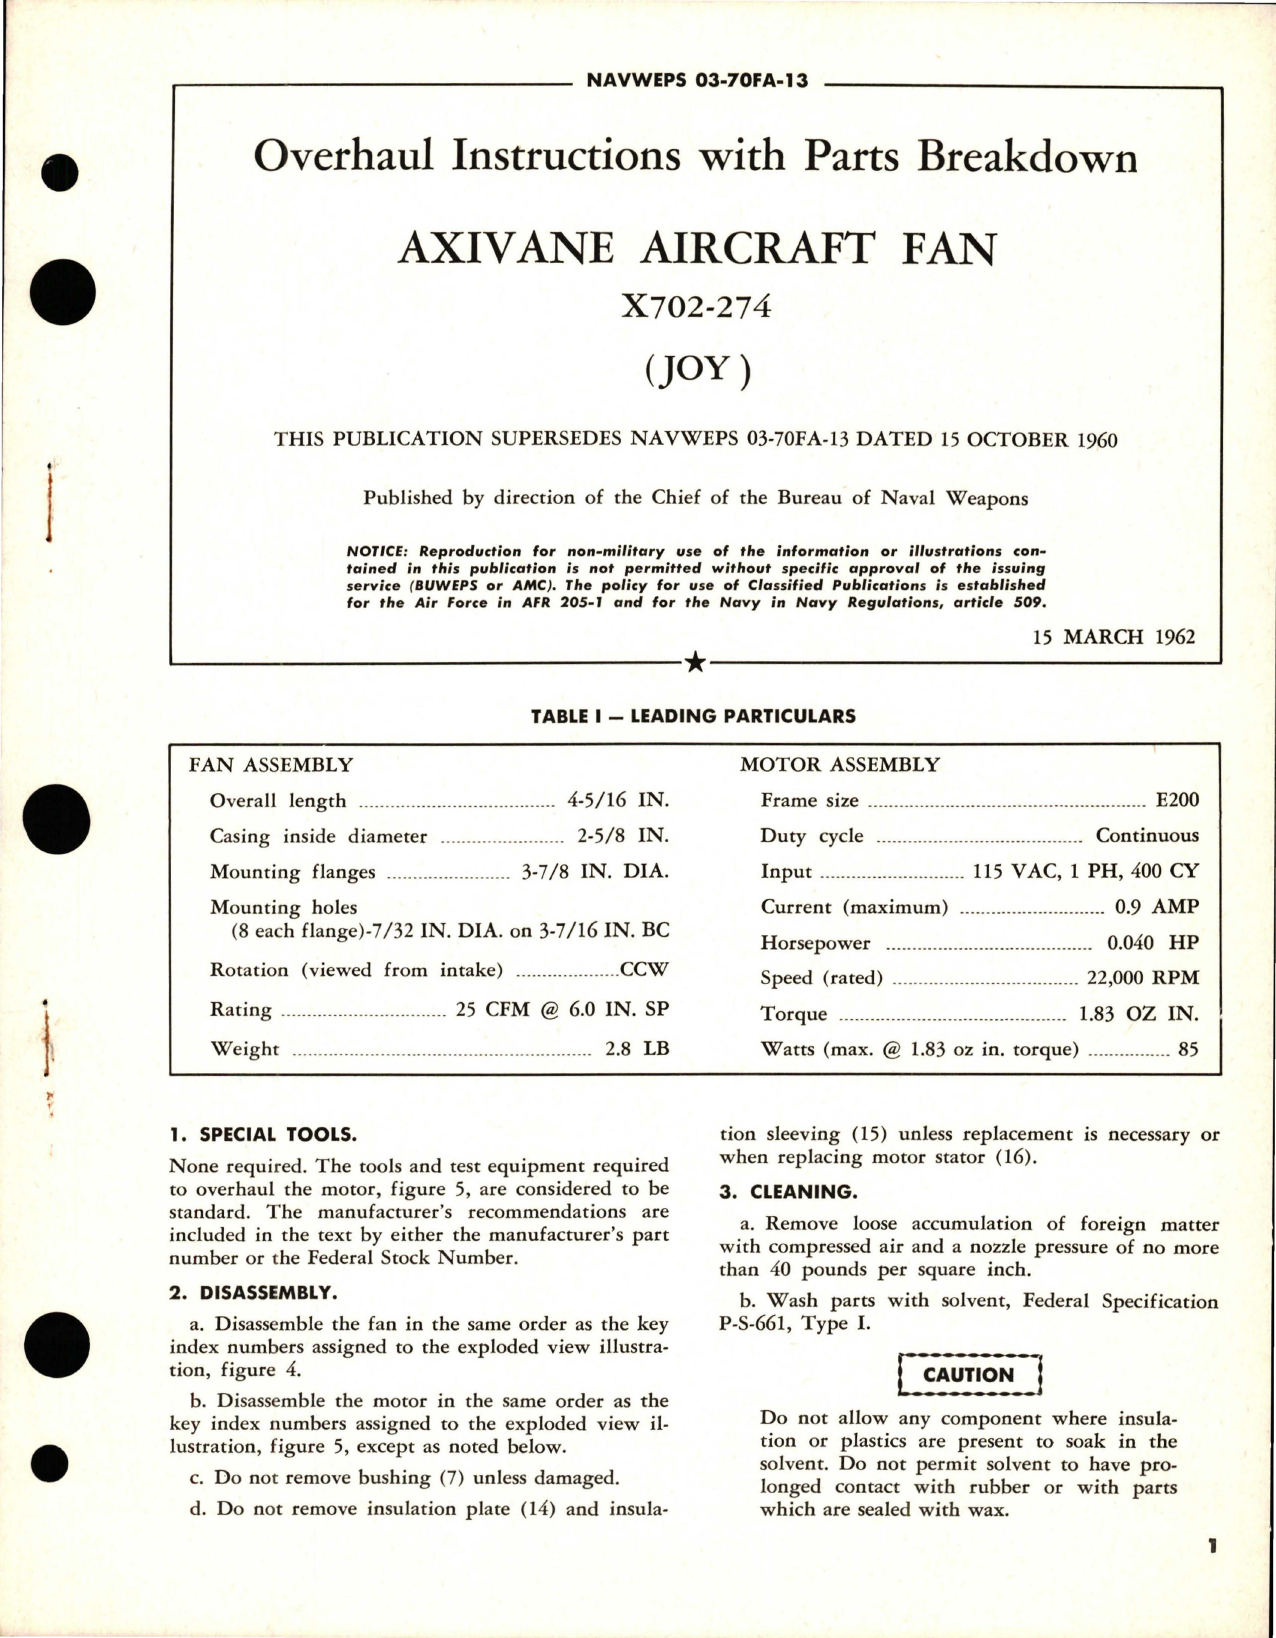 Sample page 1 from AirCorps Library document: Overhaul Instructions with Parts Breakdown for Axvane Aircraft Fan - X702-274 